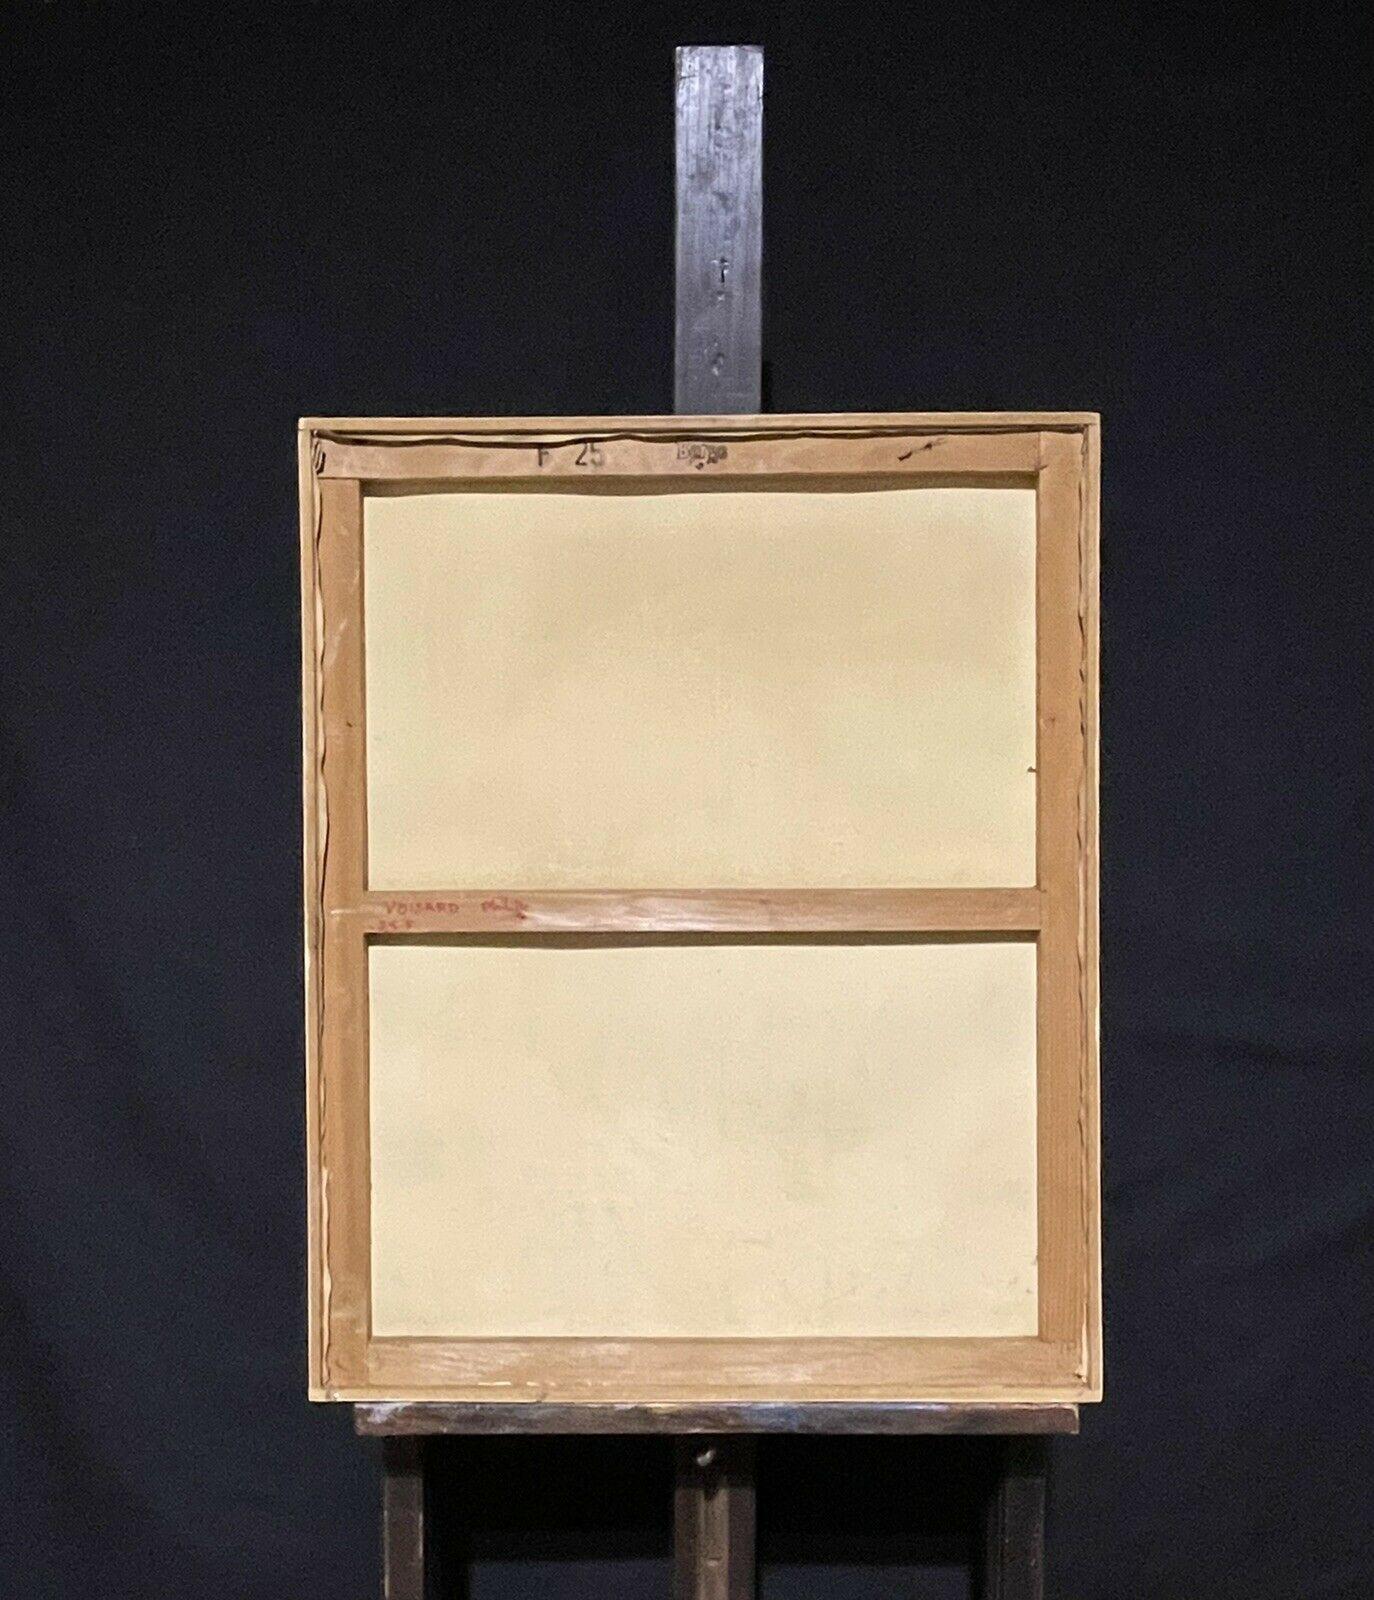 Artist/ School: French School, signed lower corner, circa 1980's period.

Title: Cubist abstract composition of figures.

Medium: oil painting, on canvas. 

Size:      frame: 32.5 x 26.5 
           painting: 32 x 26 inches
        
Provenance: